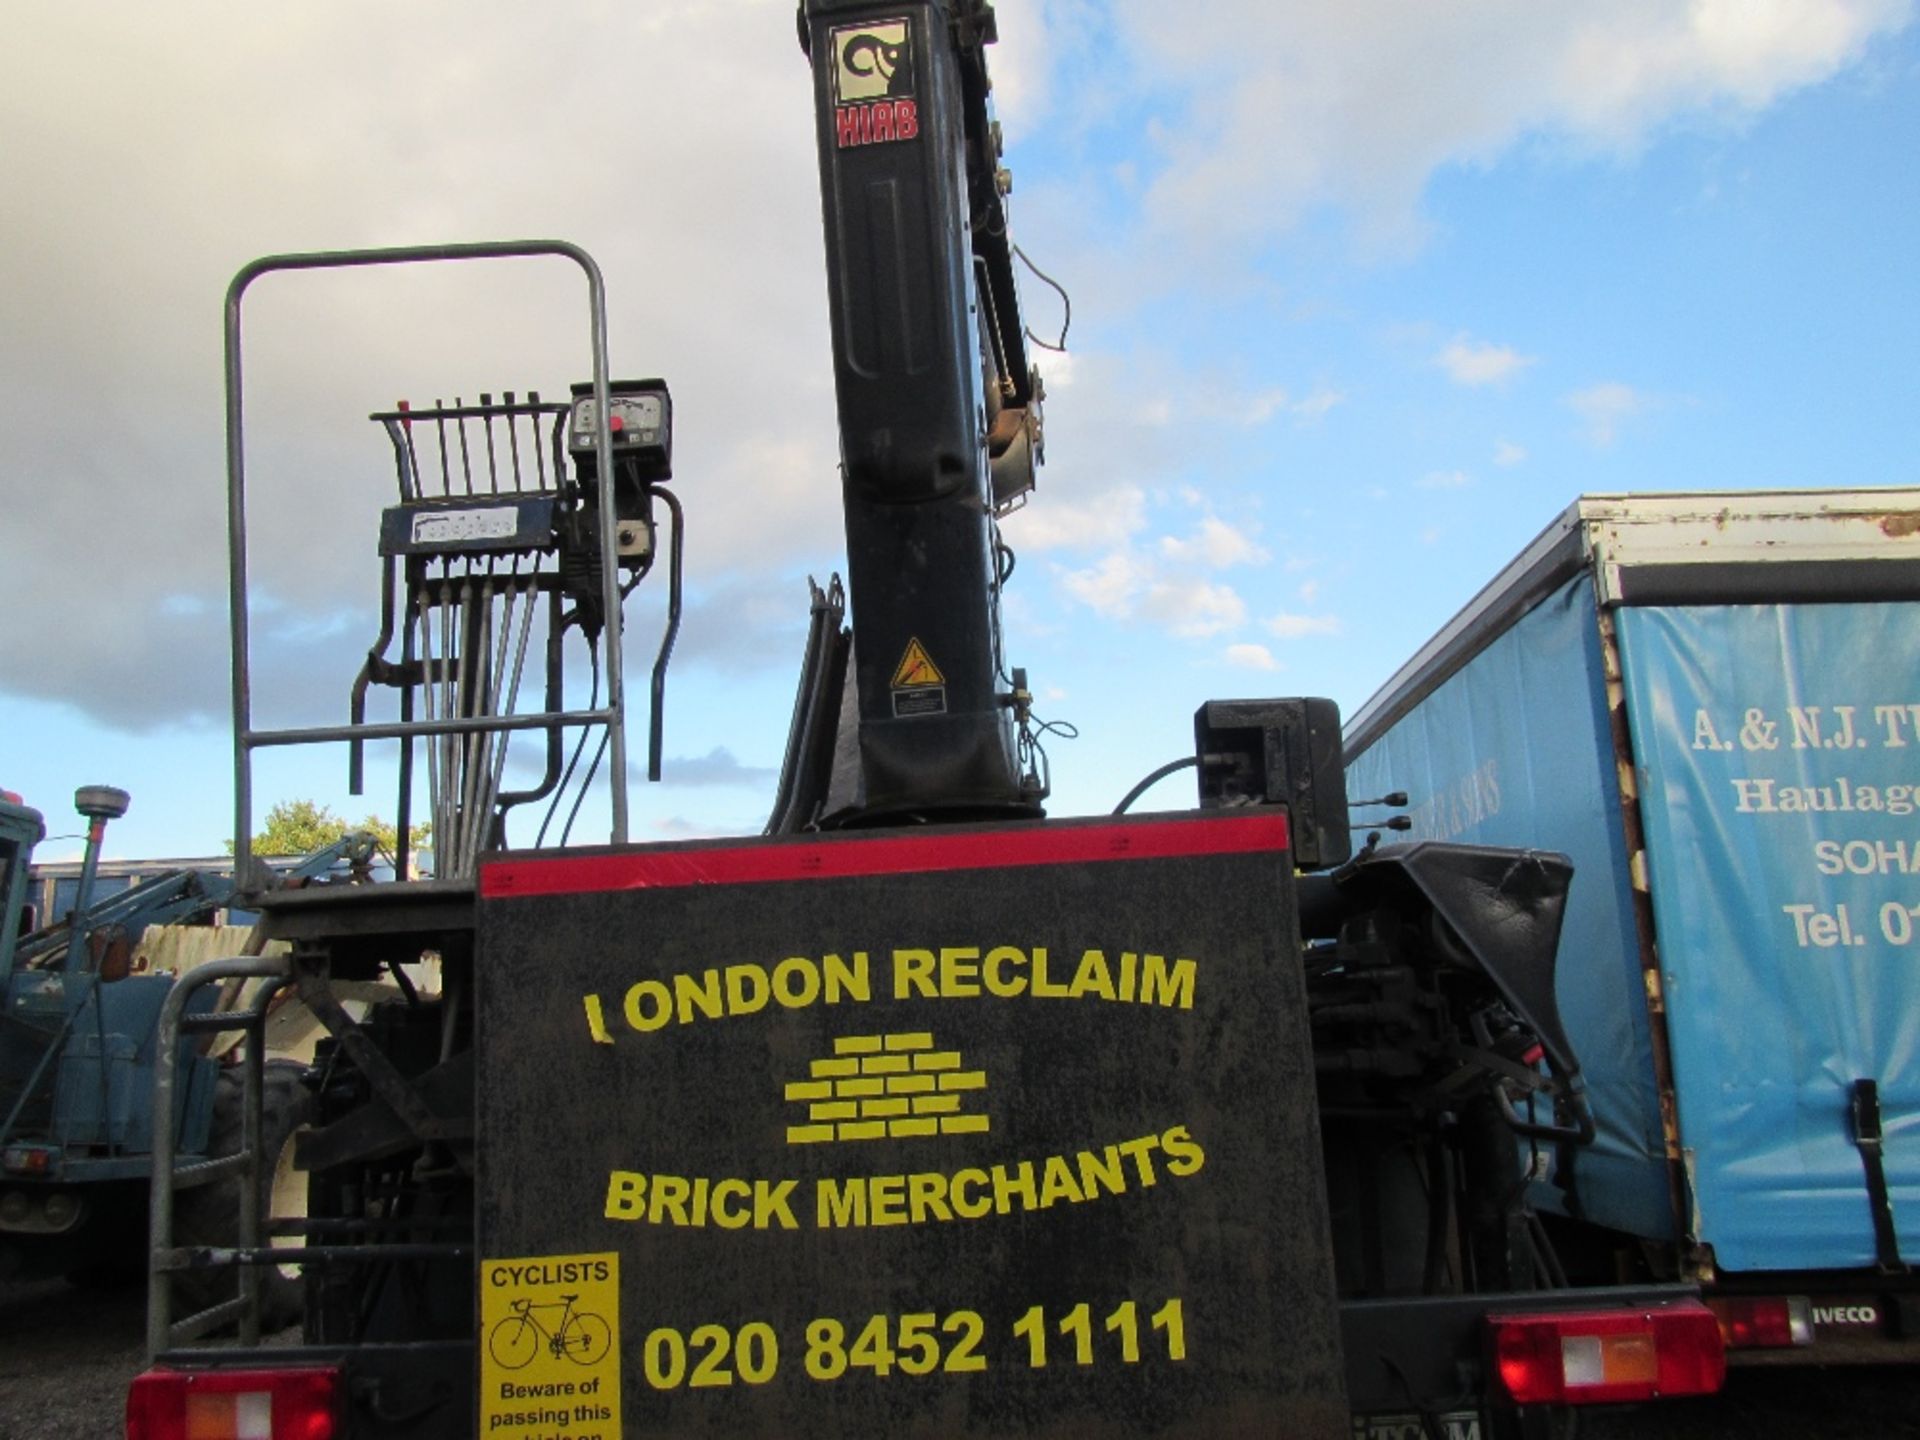 2008 Volvo FM9 6x2 Crane Lorry with Hiab Double Extension Crane, Rear Lift Axle. NUMBER PLATE NOT - Image 5 of 9